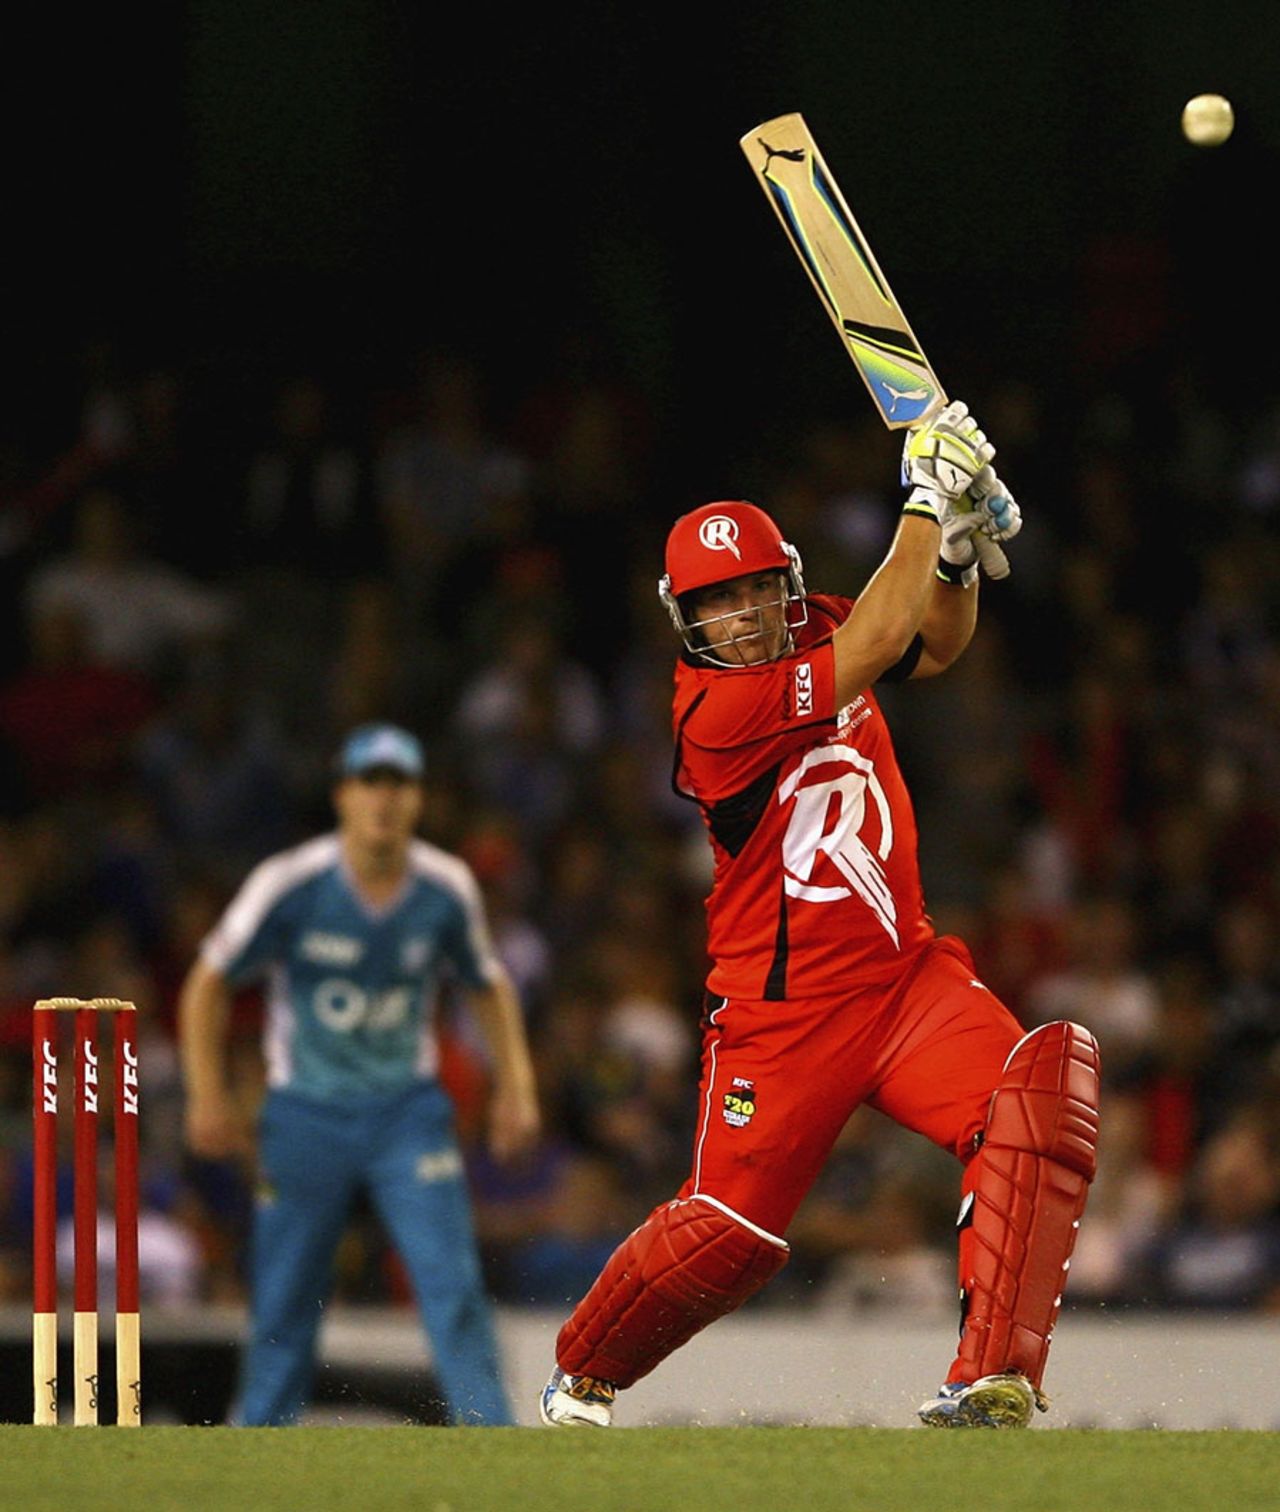 Aaron Finch top-scored for the Renegades with 72, Melbourne Renegades v Brisbane Heat, BBL, Melbourne, January 12, 2012